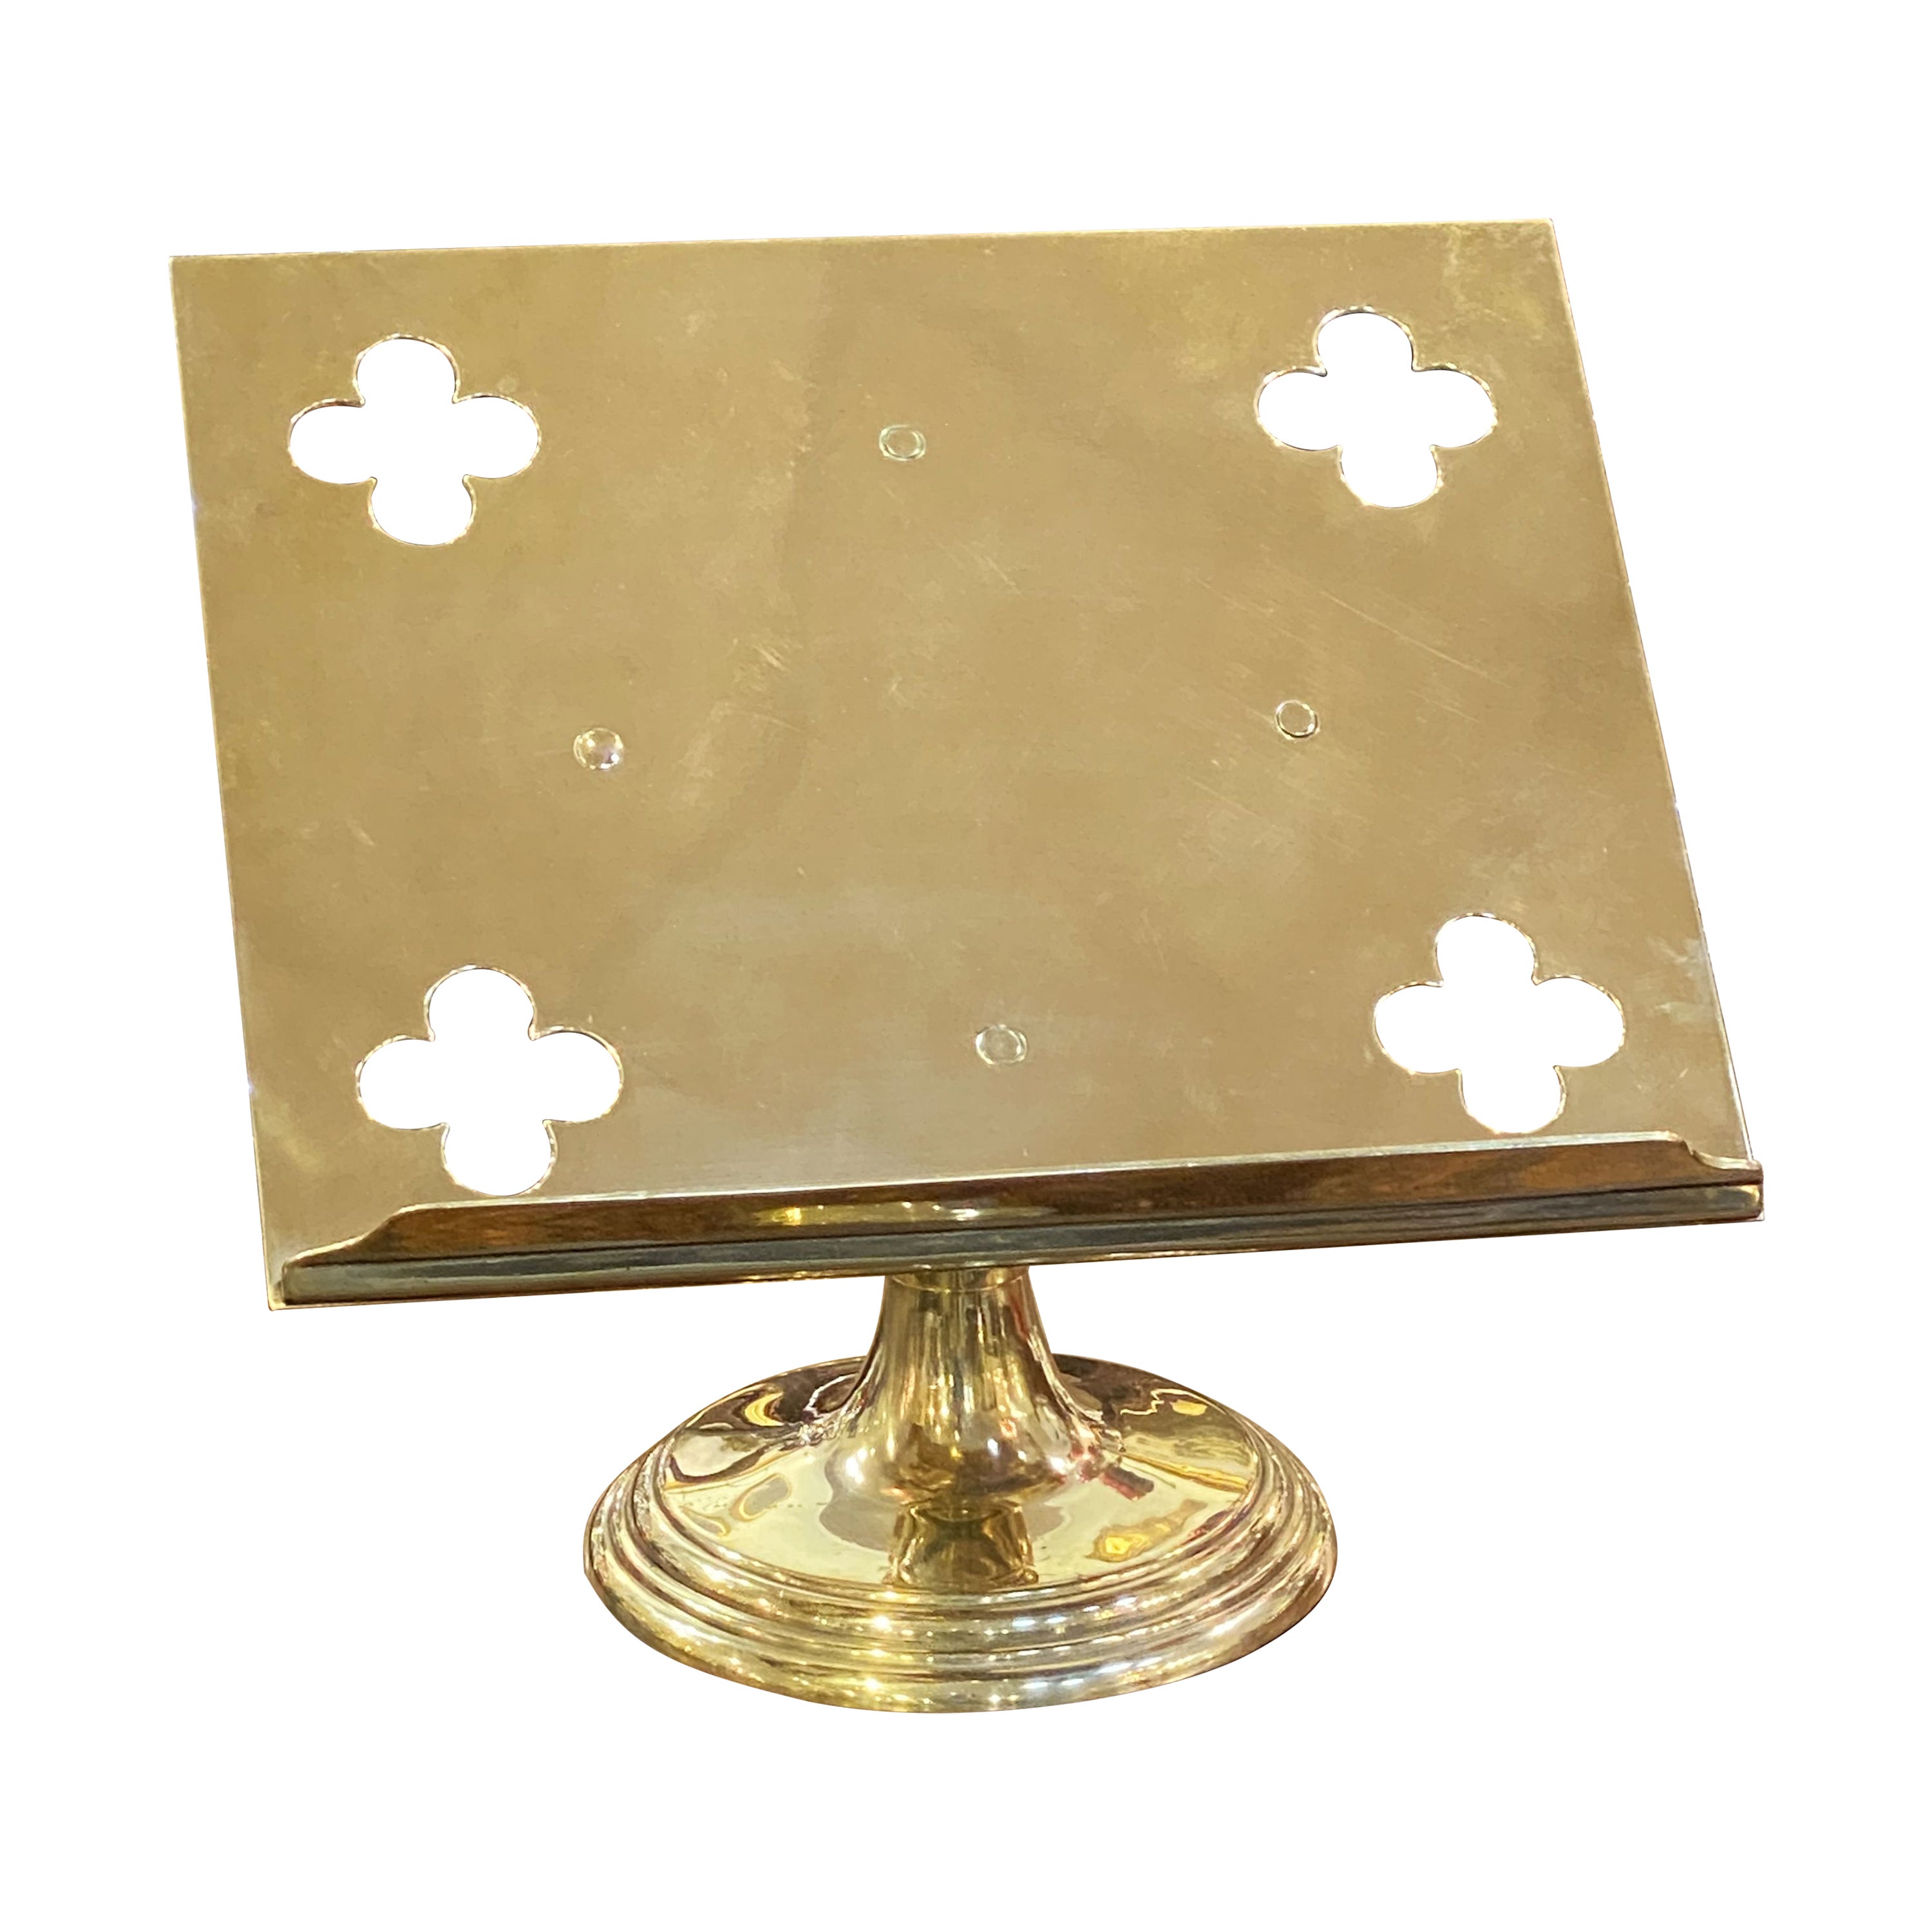  English Lectern or Book Stand of Brass For Sale